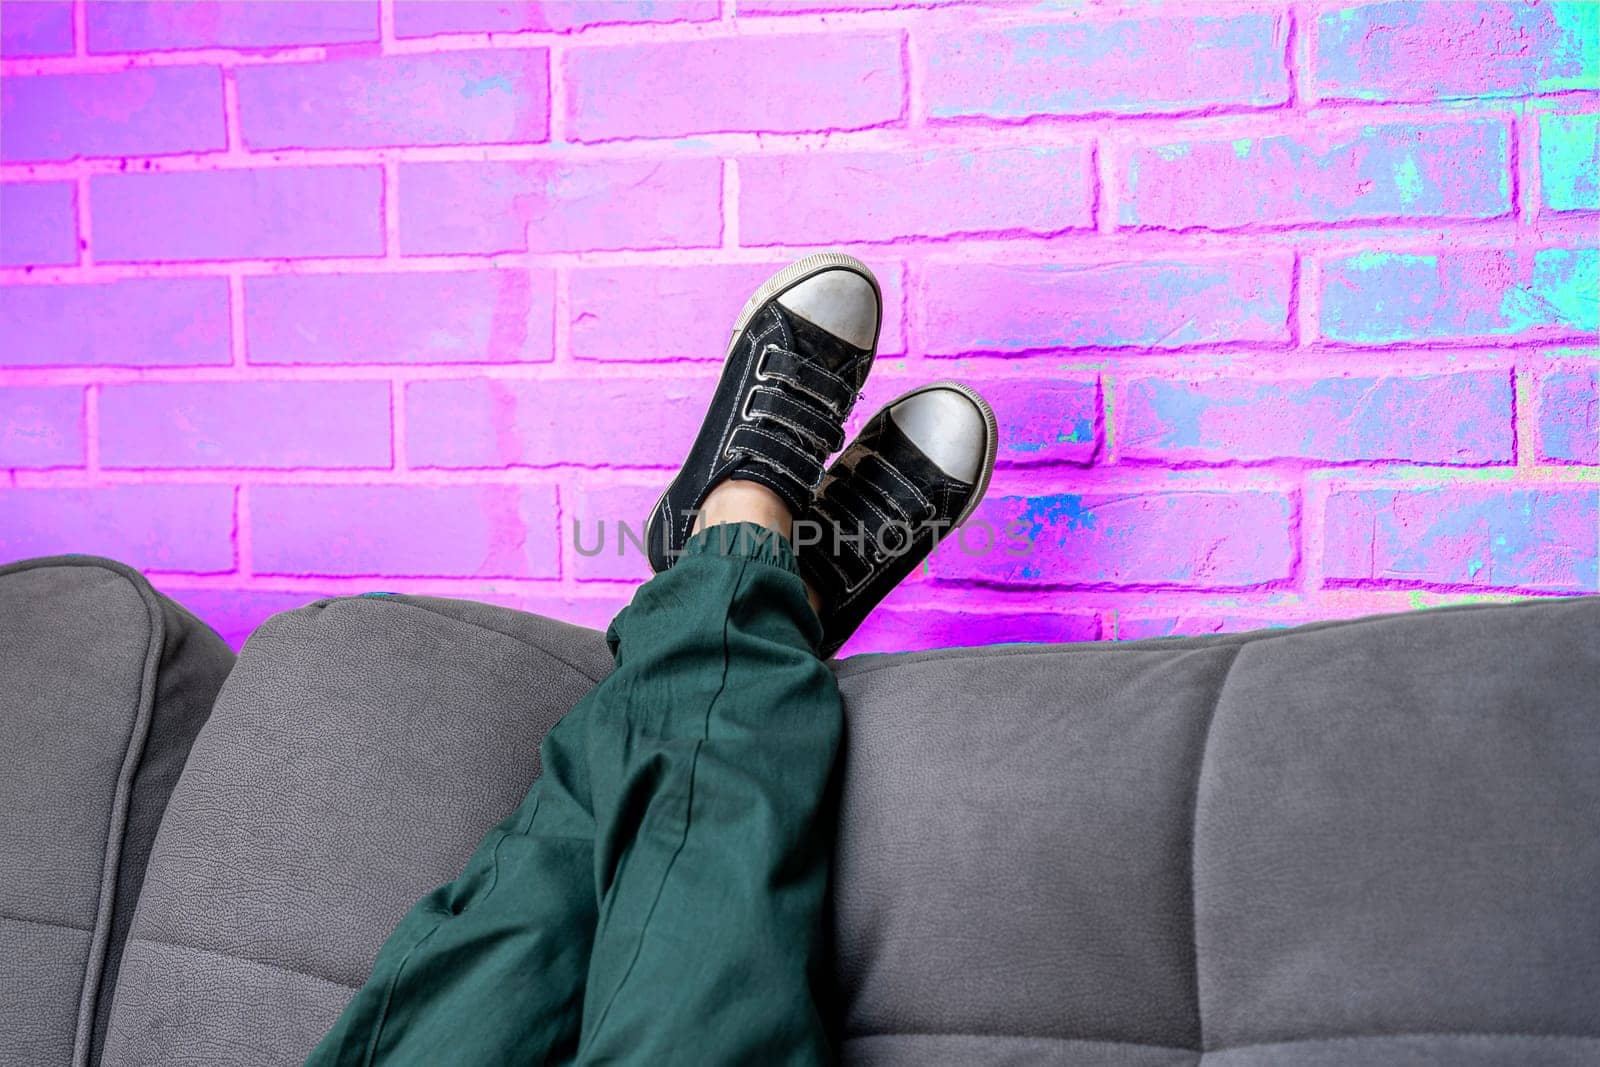 Relaxed legs of a boy in green casual pants and comfortable sneakers on a cozy sofa in the living room against a neon violet brick wall. children's feet in fashionable sneakers lie on the back of the sofa. Space for copying. Light violet neon brick background